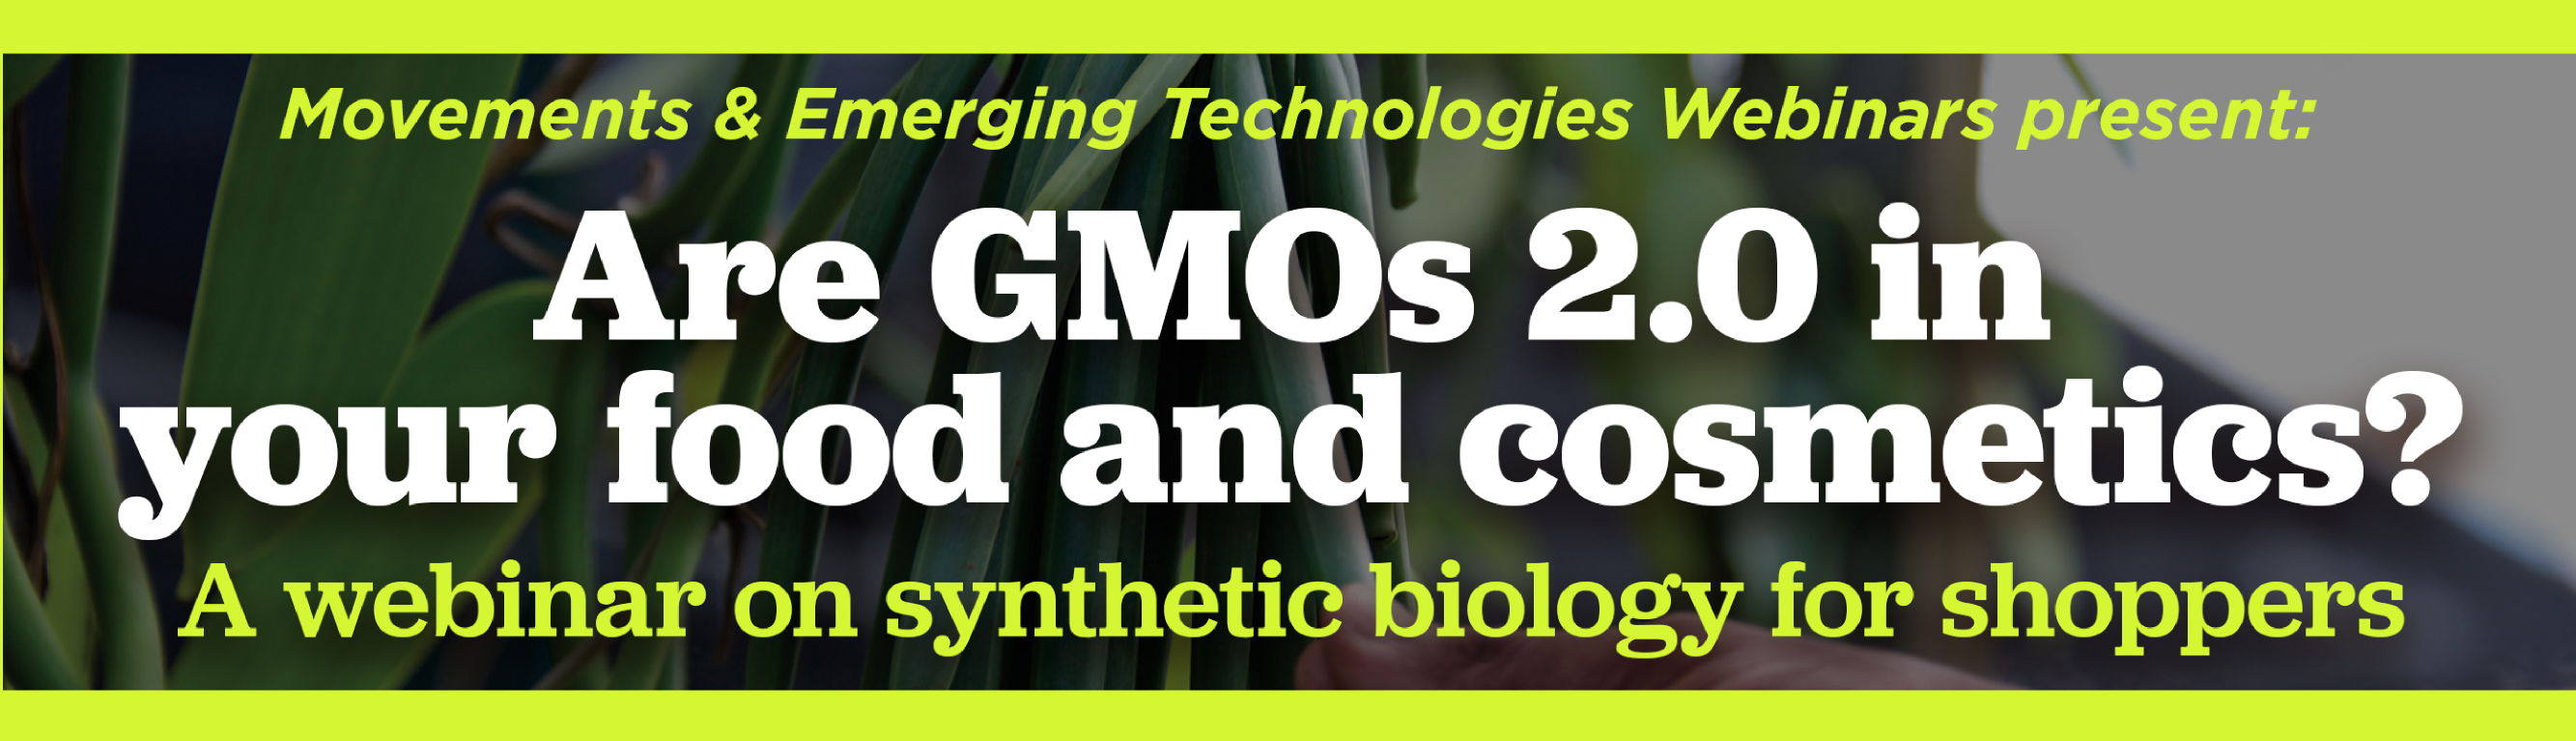 Webinar: Are GMOs 2.0 in your food and cosmetics?